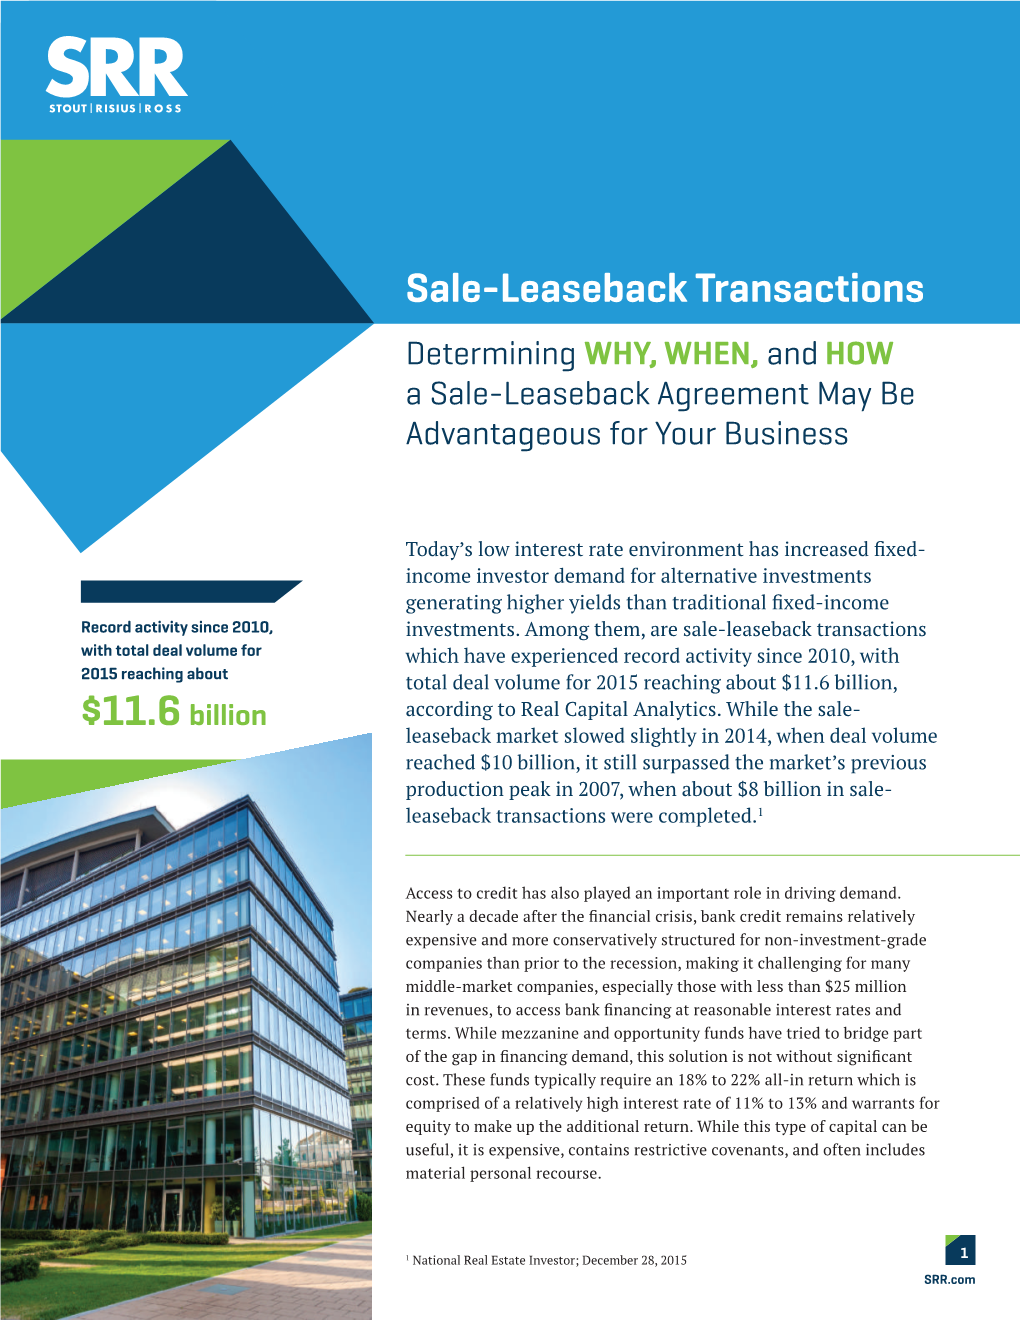 Sale-Leaseback Transactions Determining WHY, WHEN, and HOW a Sale-Leaseback Agreement May Be Advantageous for Your Business